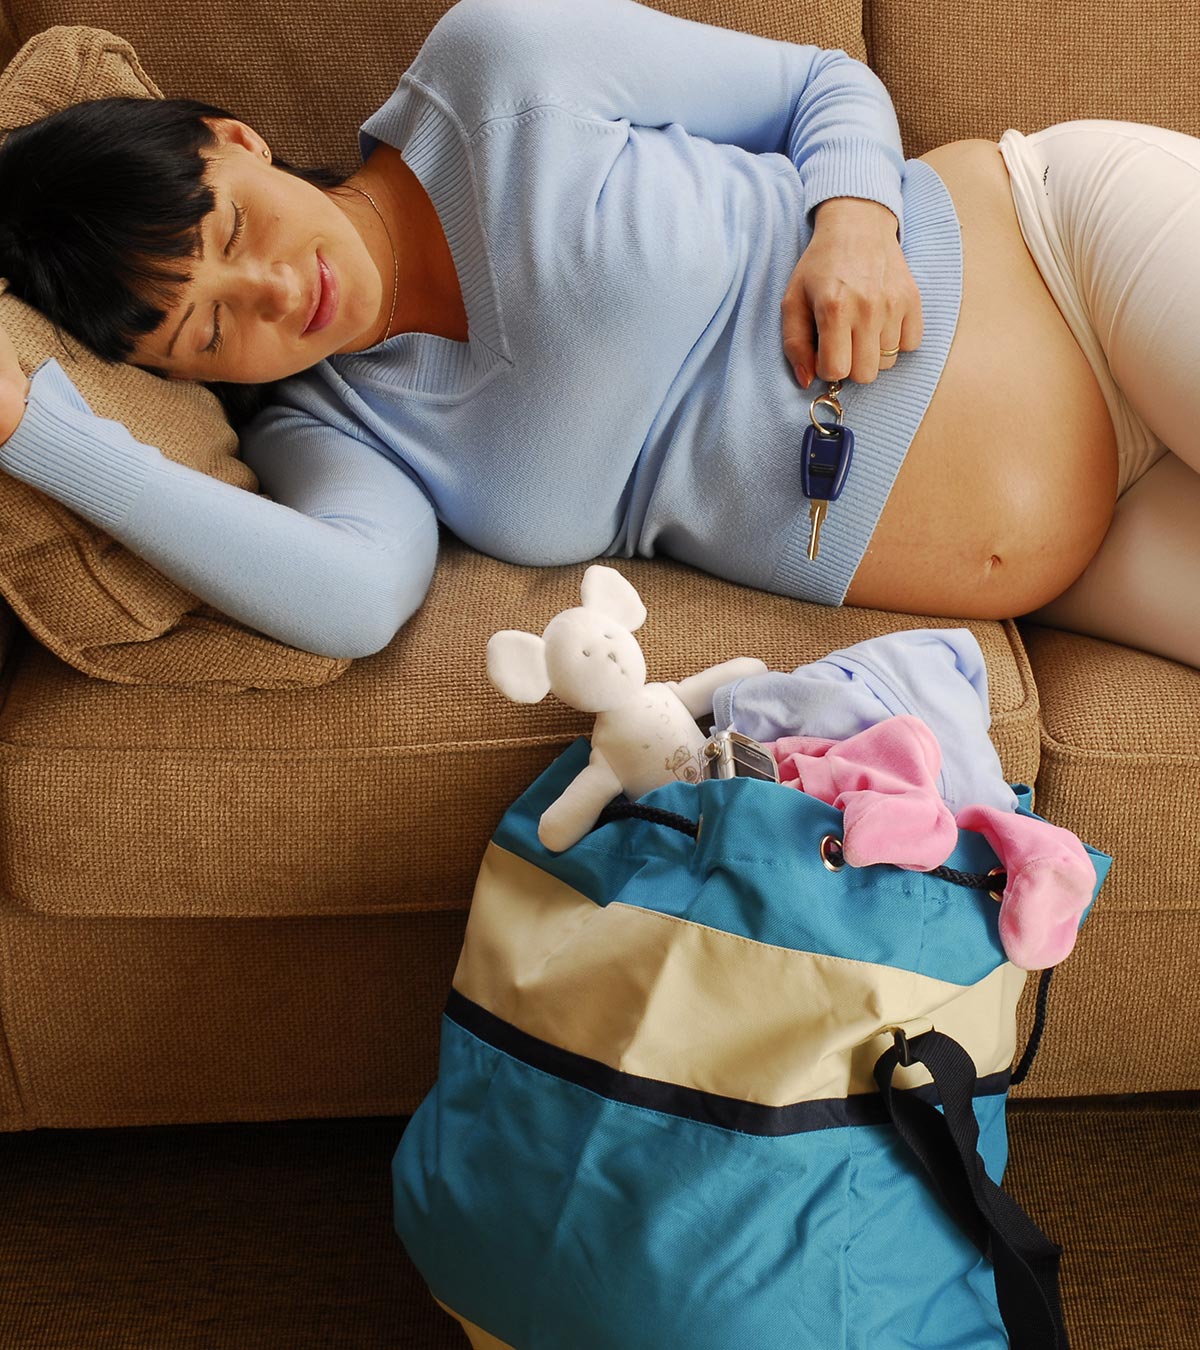 List of Must Have Items to Prepare before Your Due Date